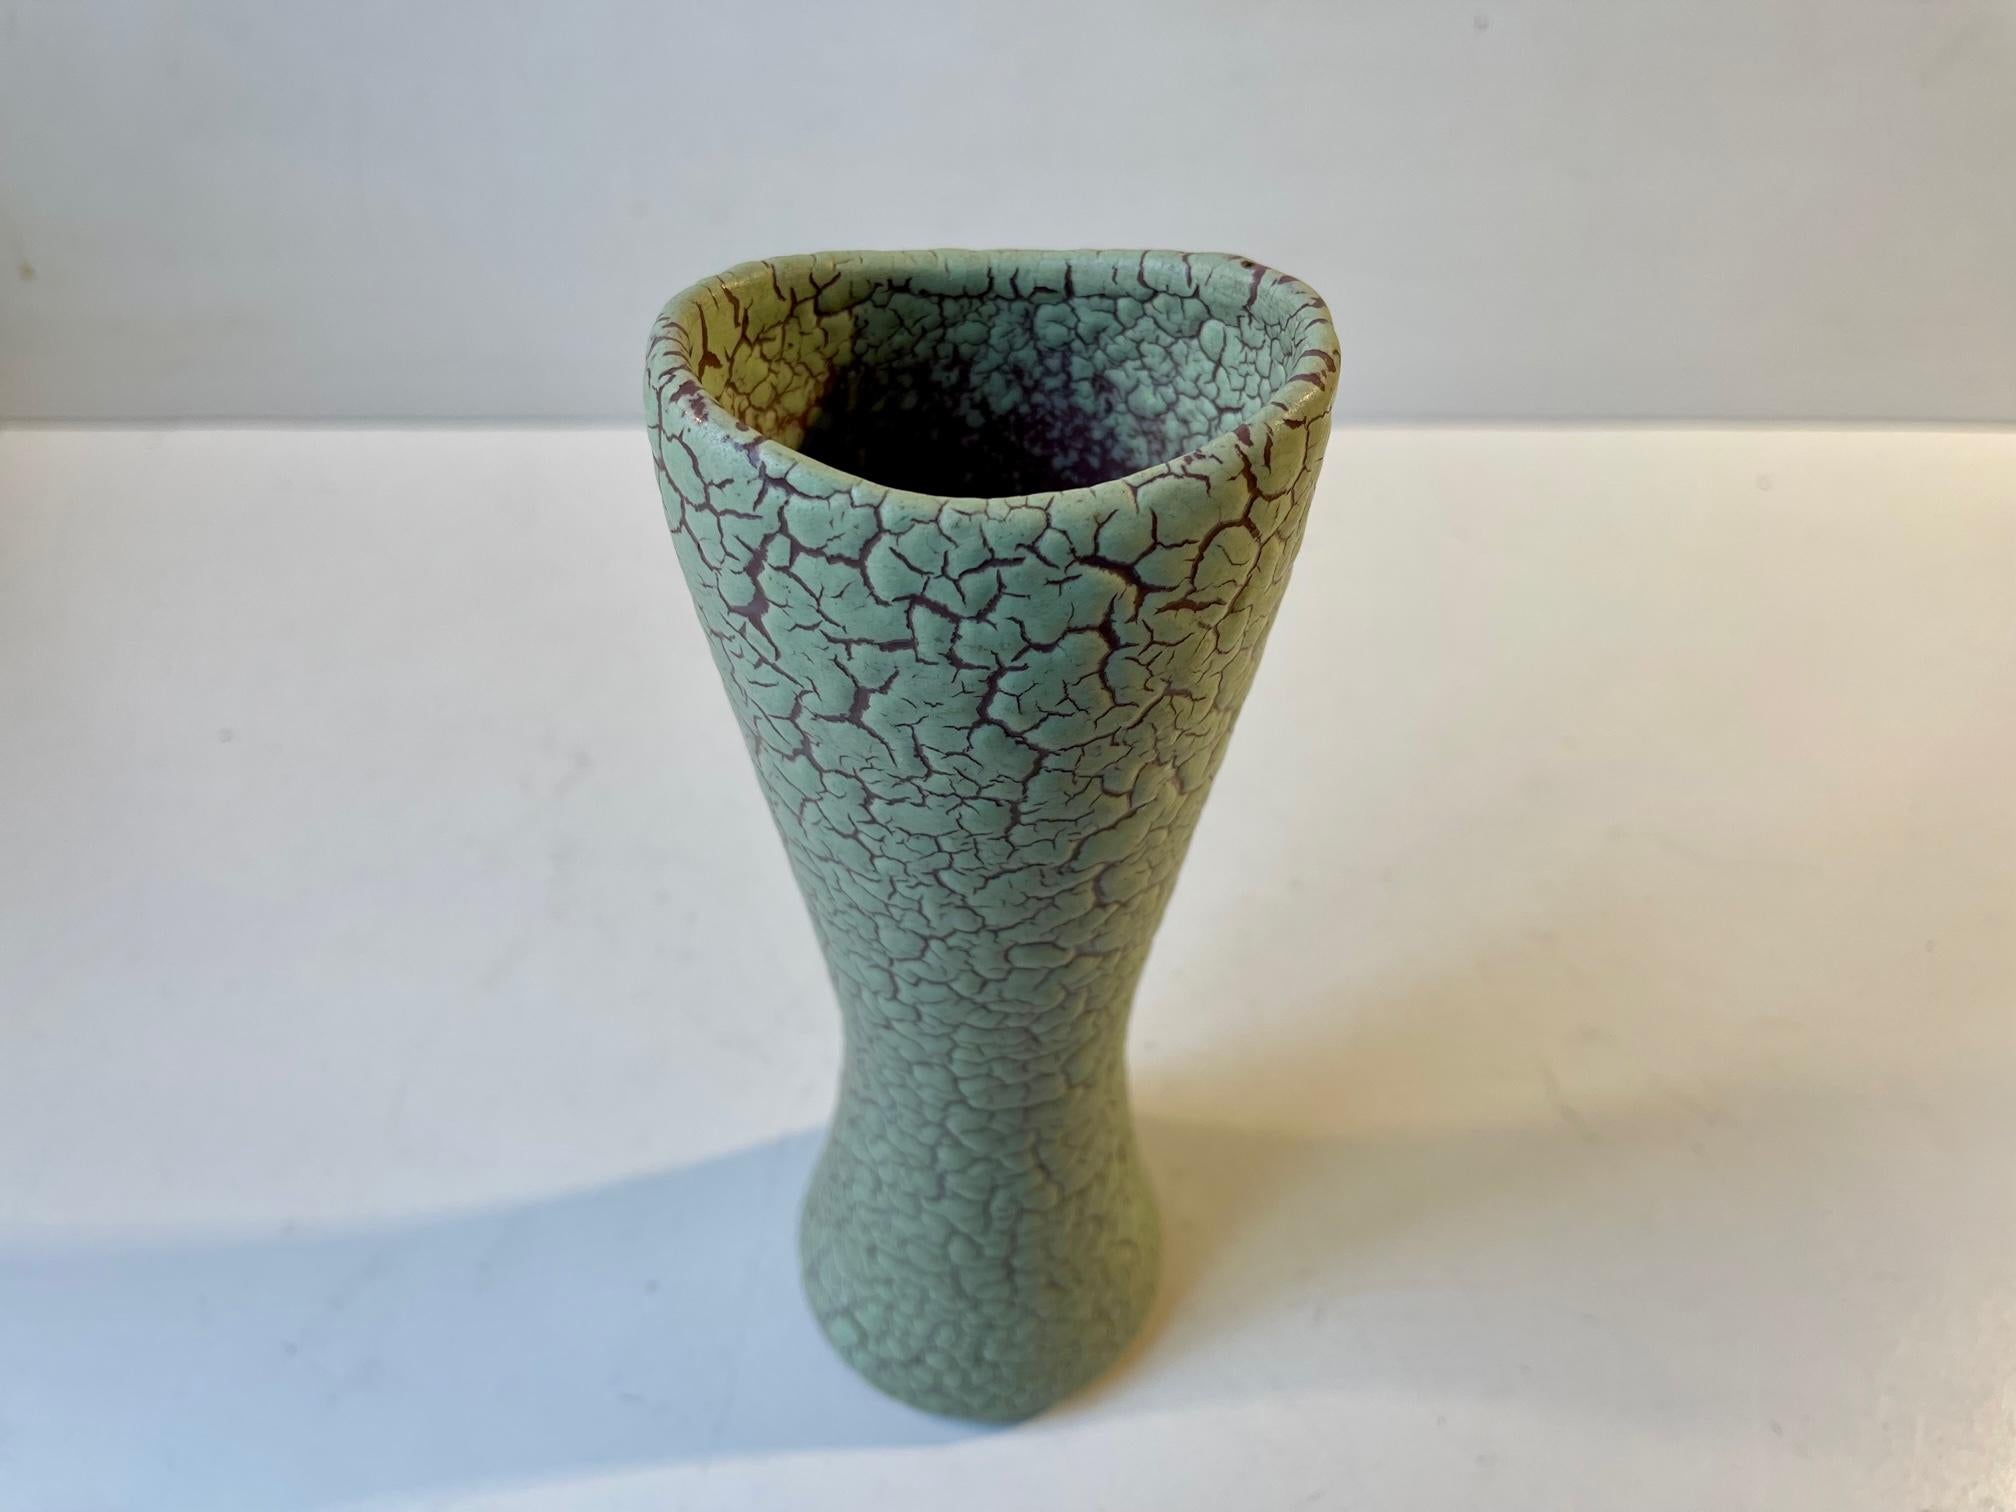 An hourglass shaped ceramic vase in delicately executed crackle glaze. Made and designed by Joska Keramik (1936-59) in Copenhagen Denmark circa 1950. Measurements: H: 21 cm, W/D: 8/6 cm.